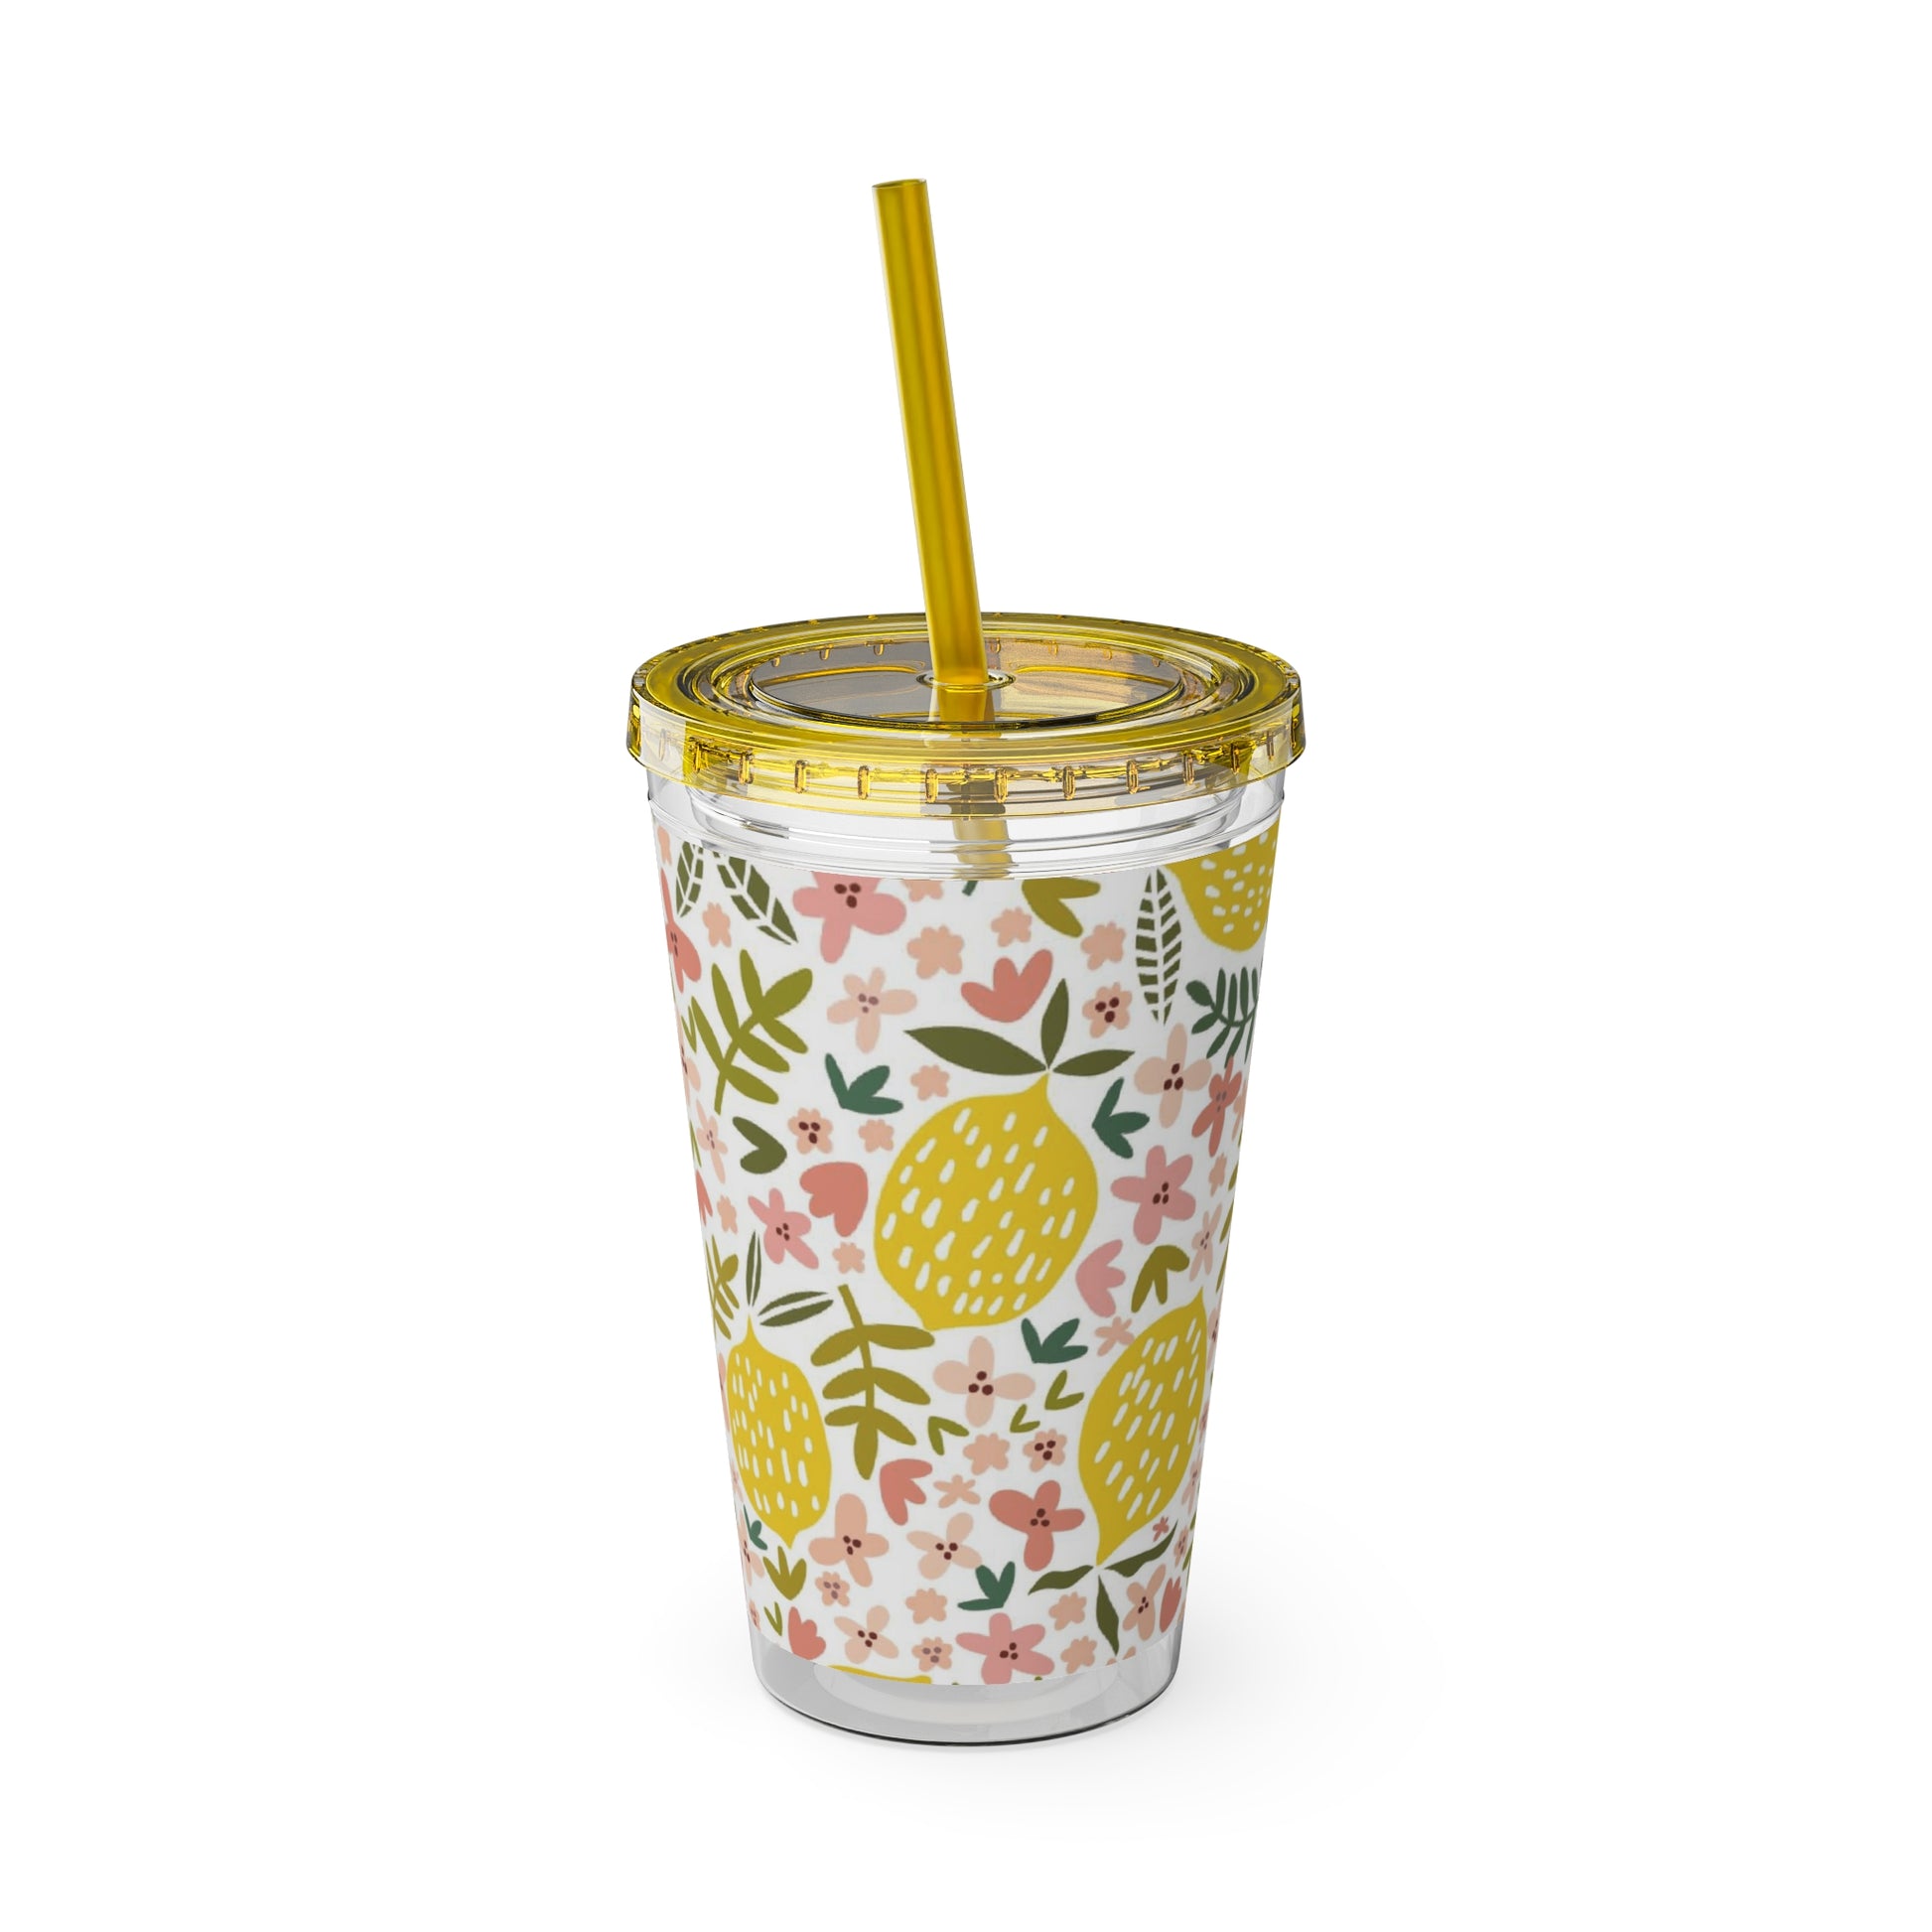 A Pink Lemons tumbler with a straw and floral pattern.